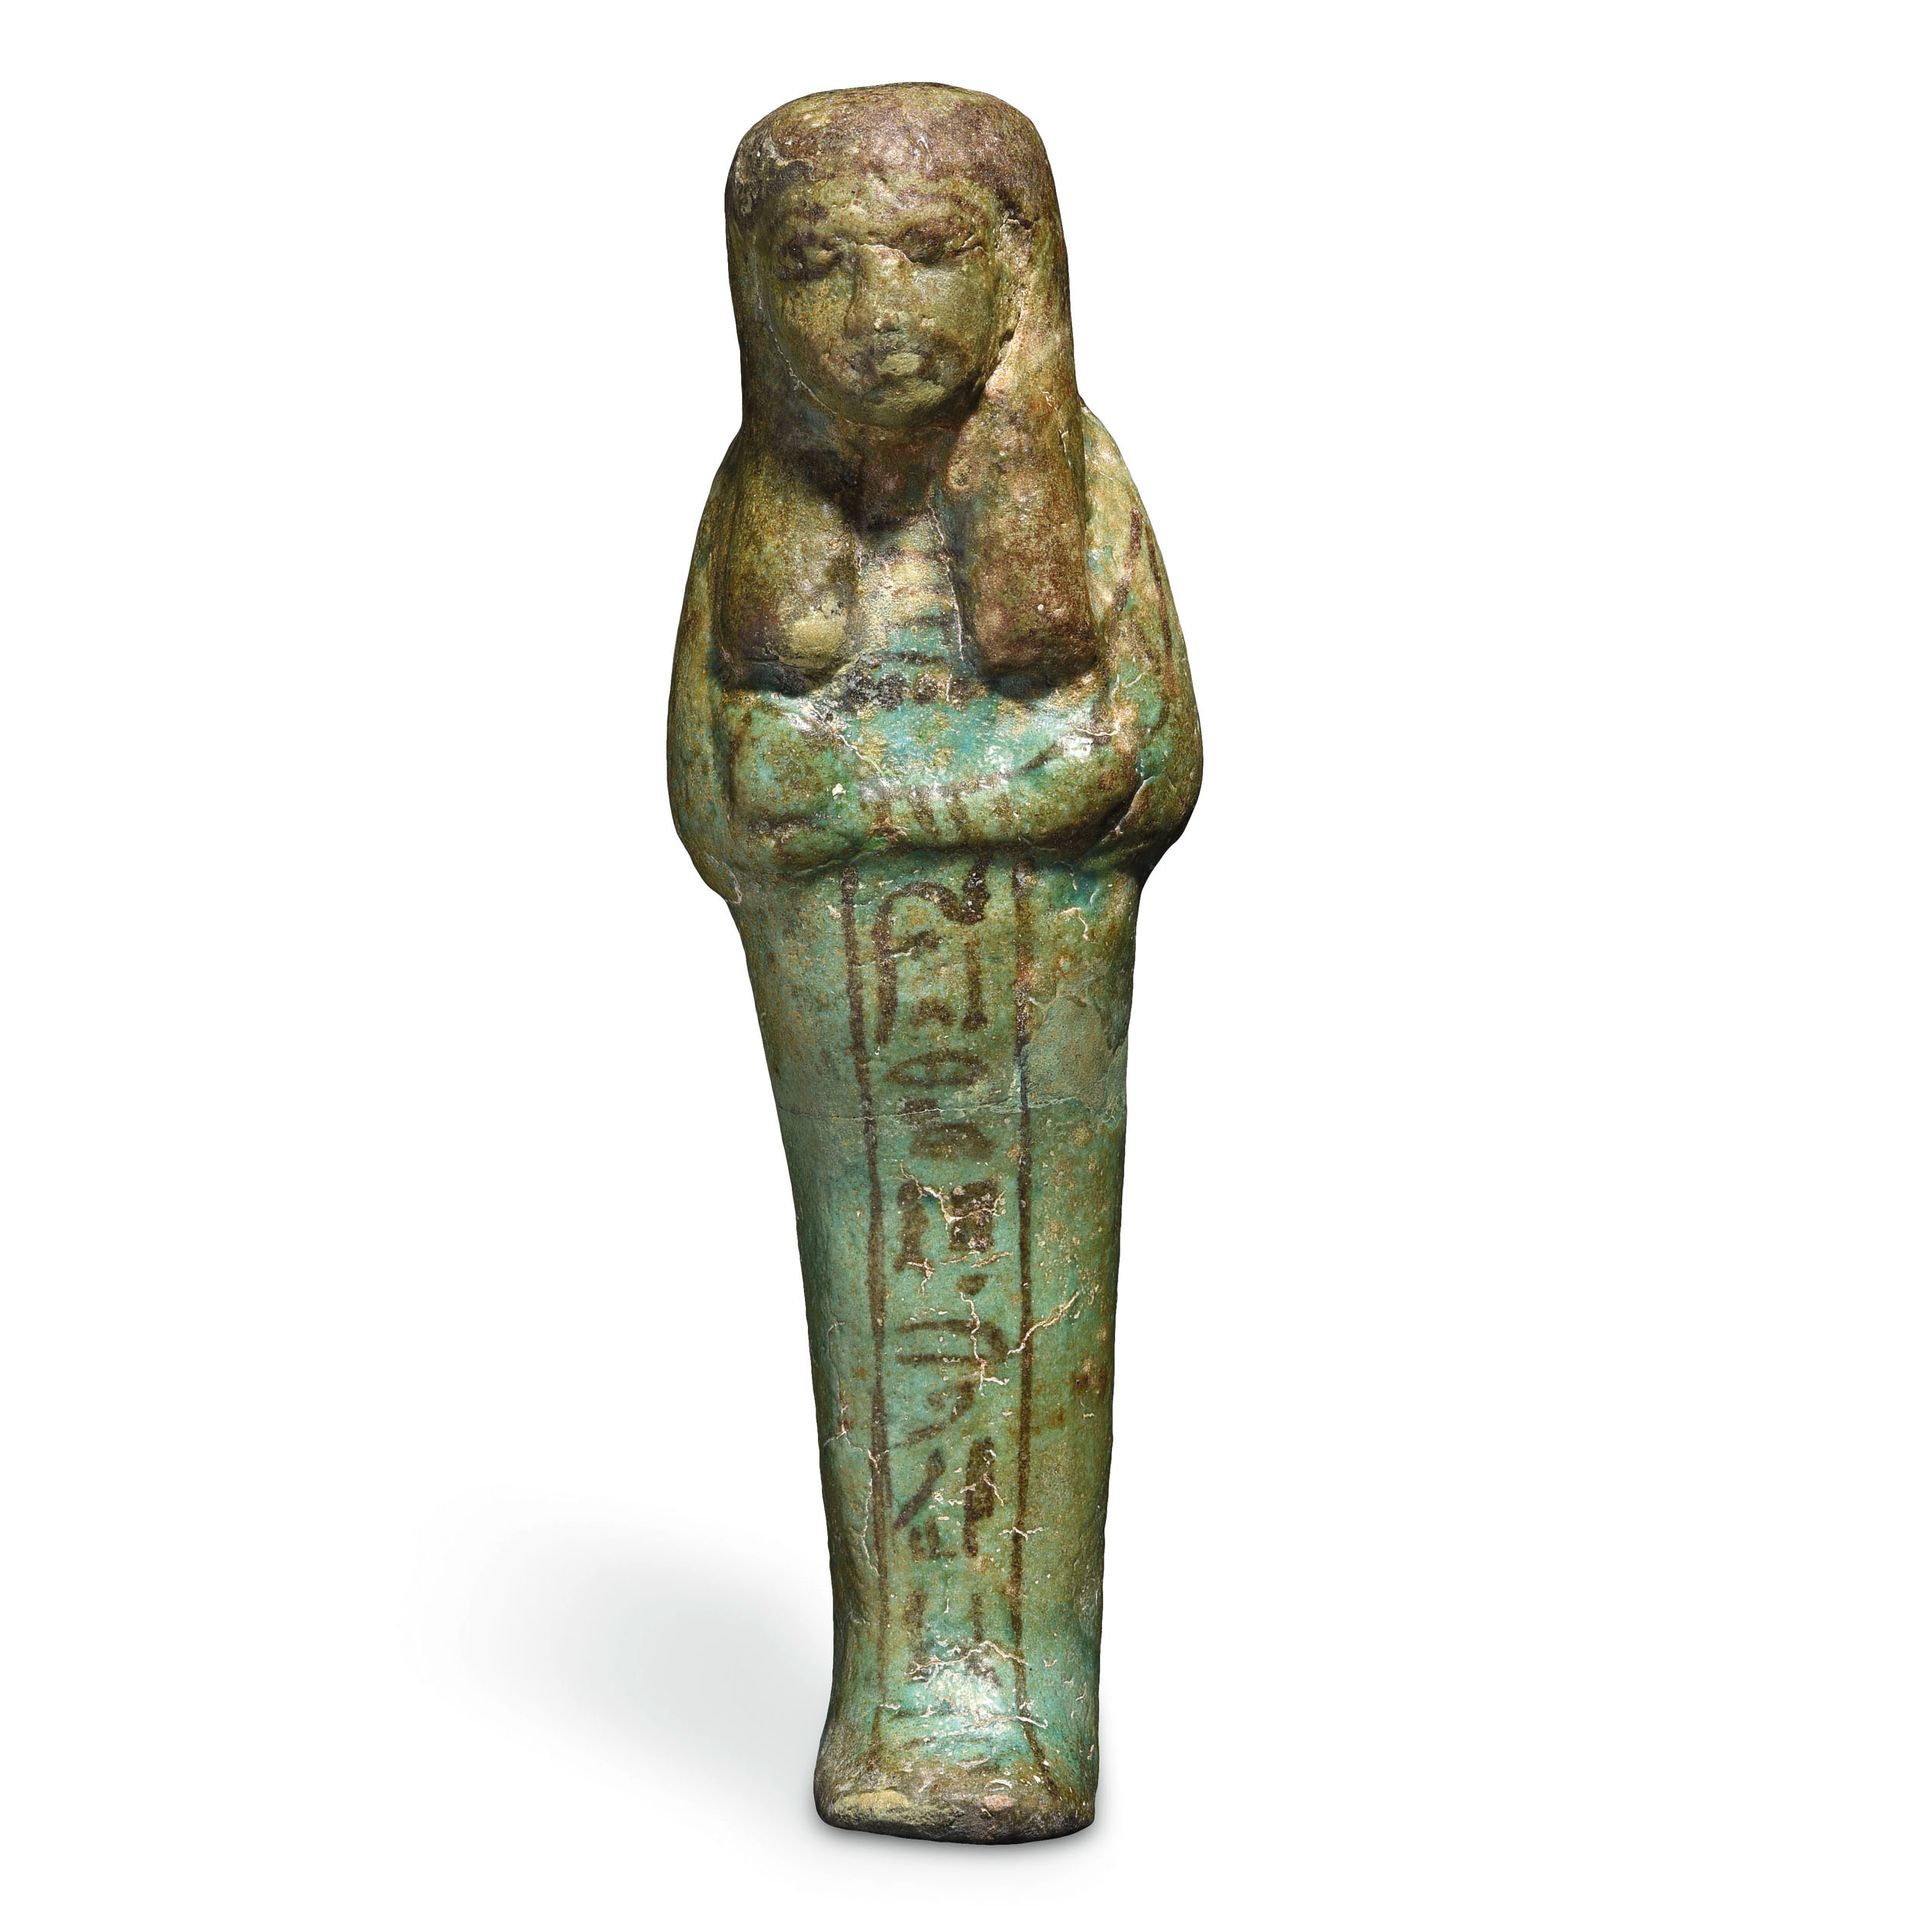 Null OUSHABTI IN THE NAME OF PTAHEMWIA

Egypt, New Kingdom, 20th dynasty, c. 110&hellip;